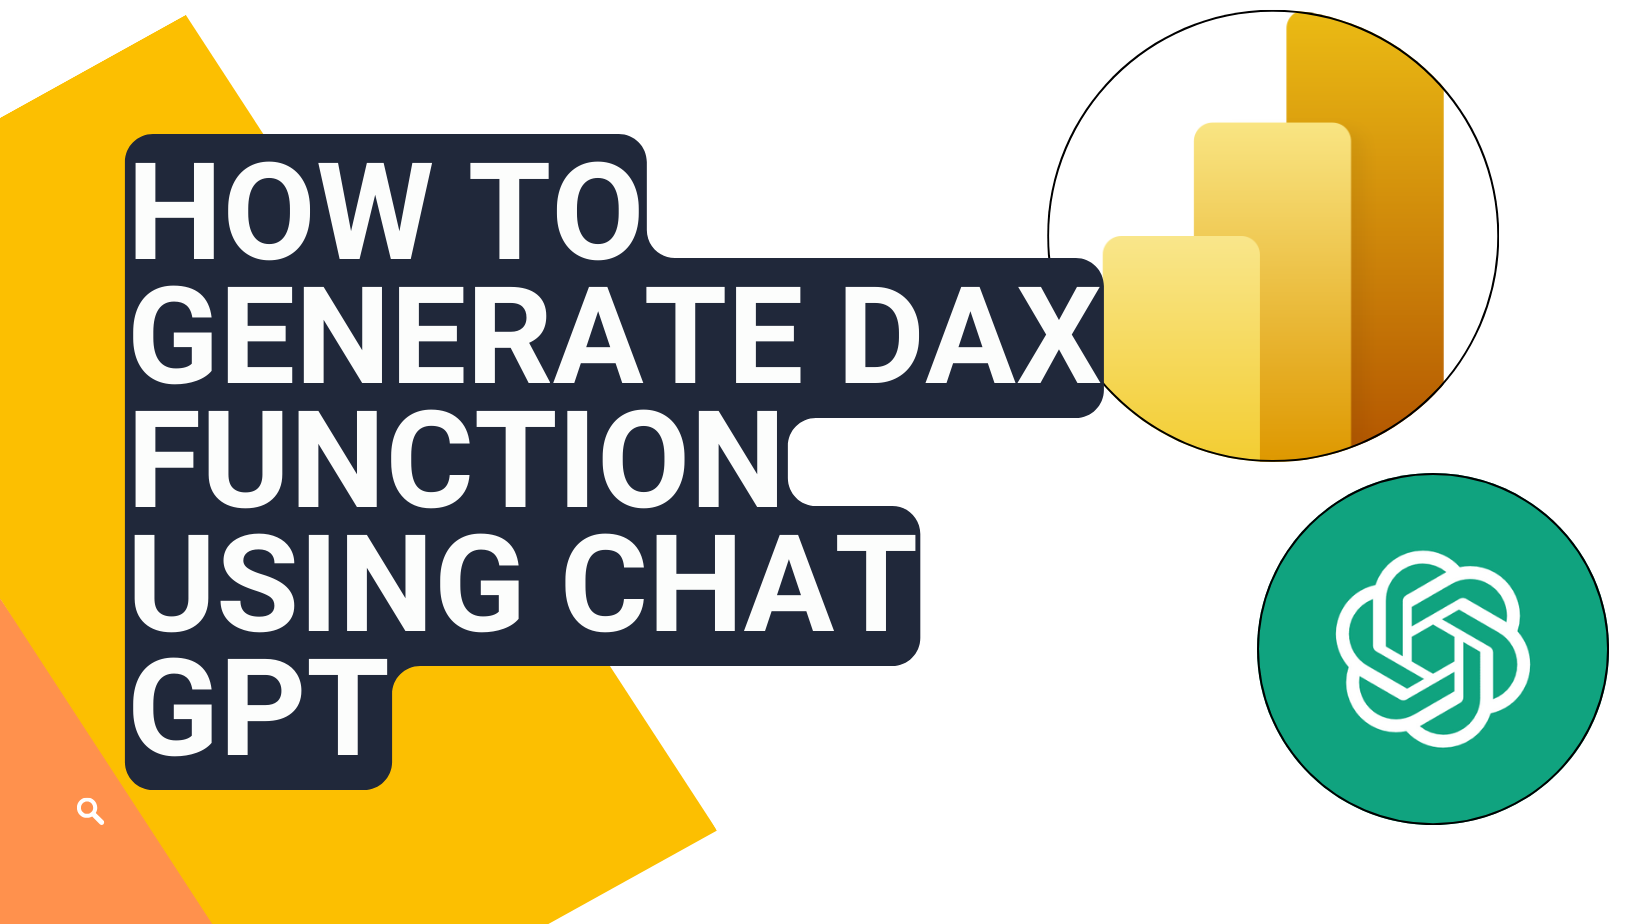 How to generate DAX Function using Chat GPT for Power BI